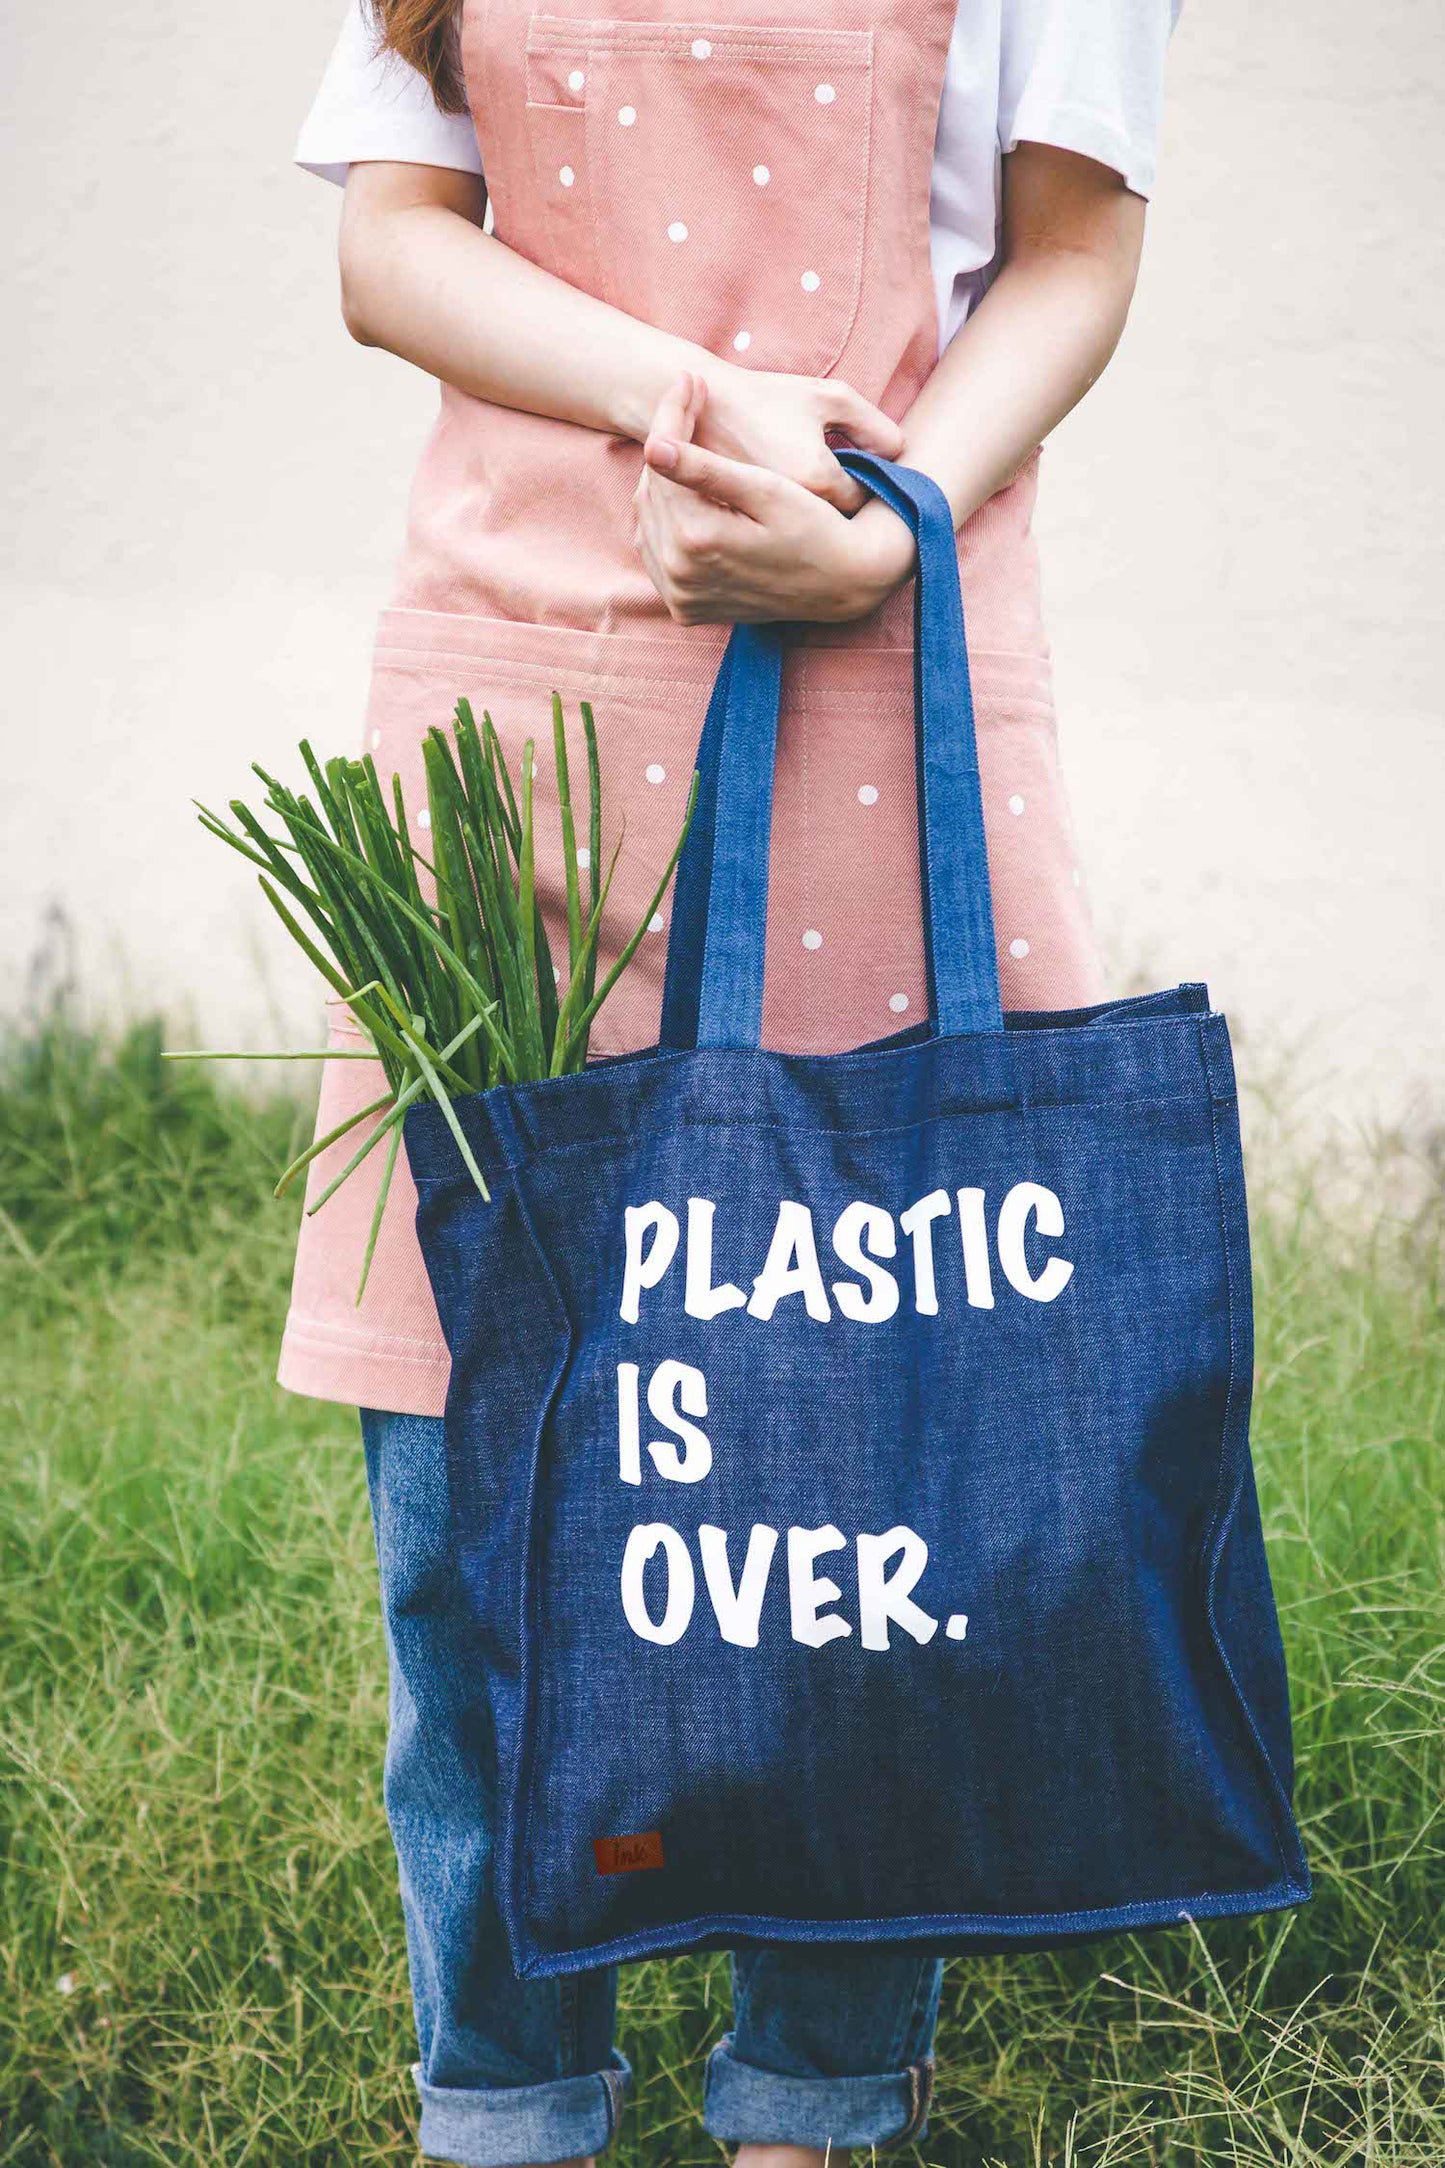 PLASTIC is over